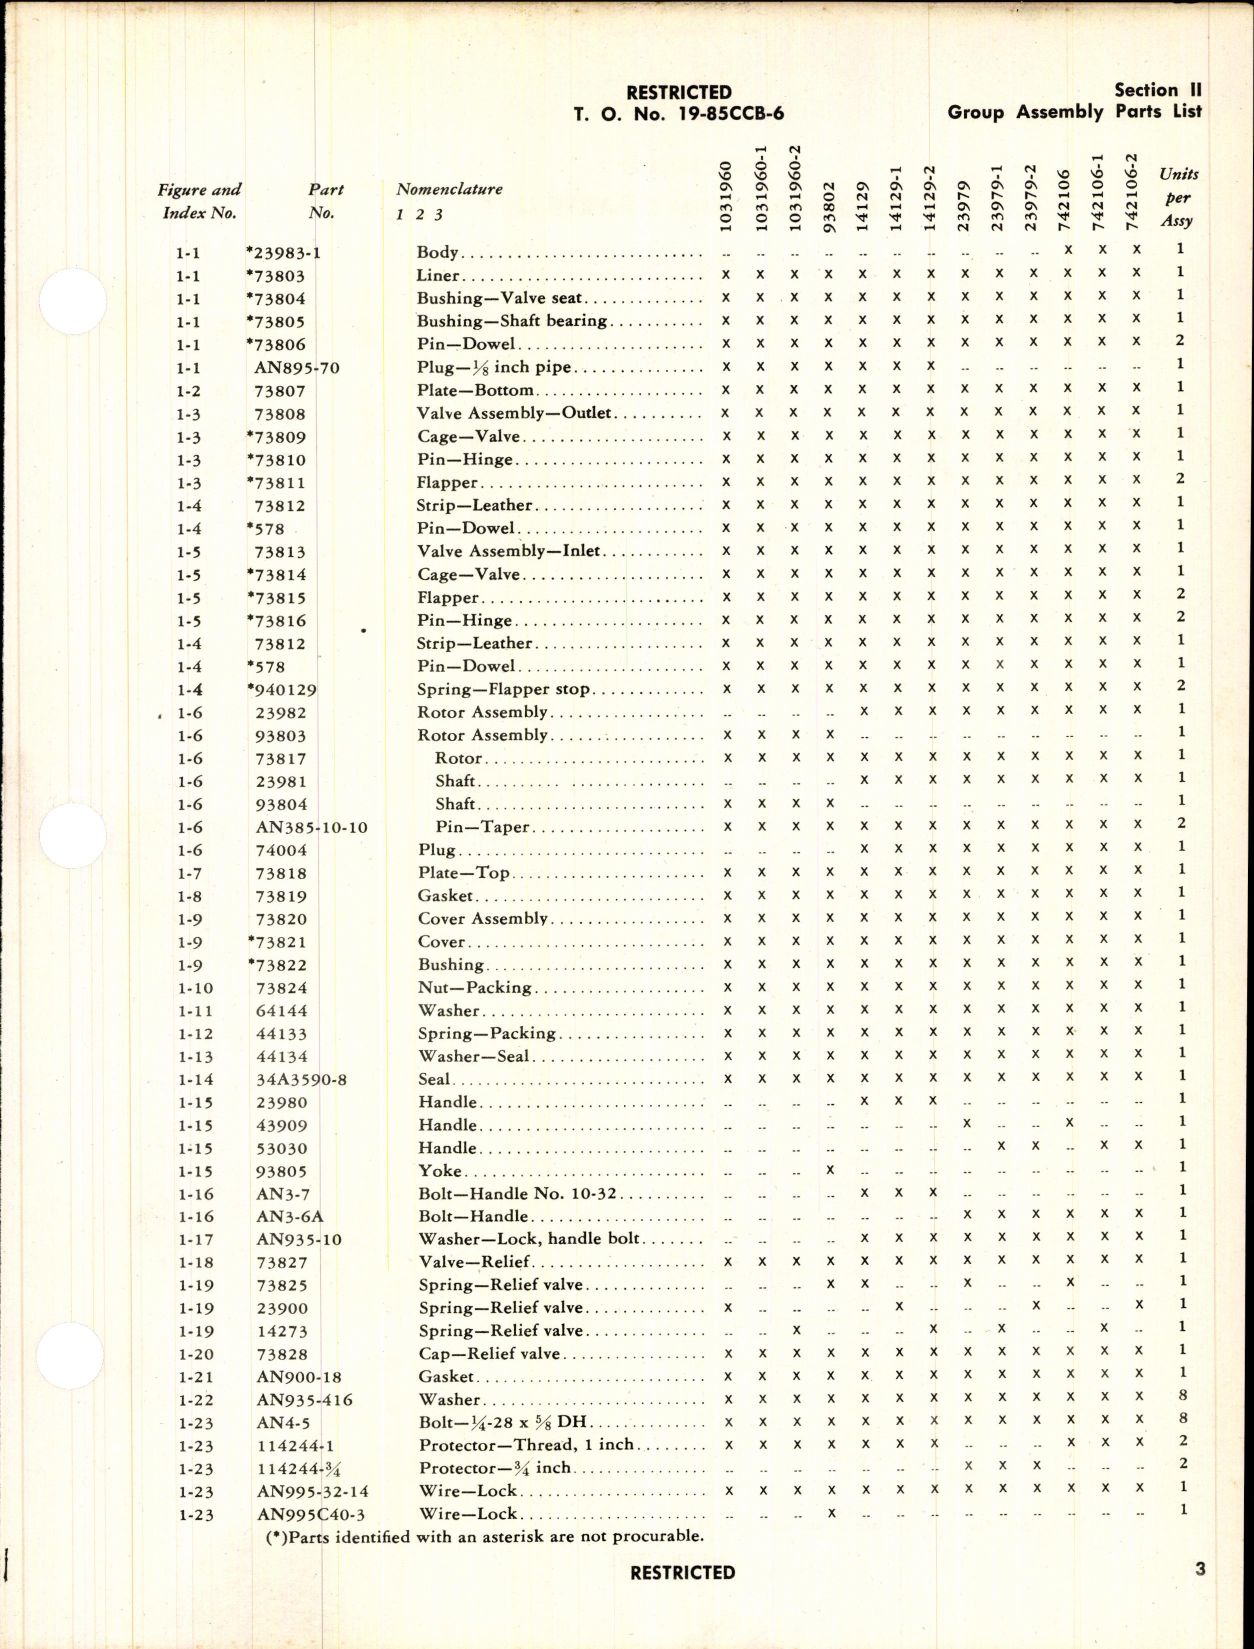 Sample page 5 from AirCorps Library document: Parts Catalog for Fuel Pumps Types D-4 and D-4A